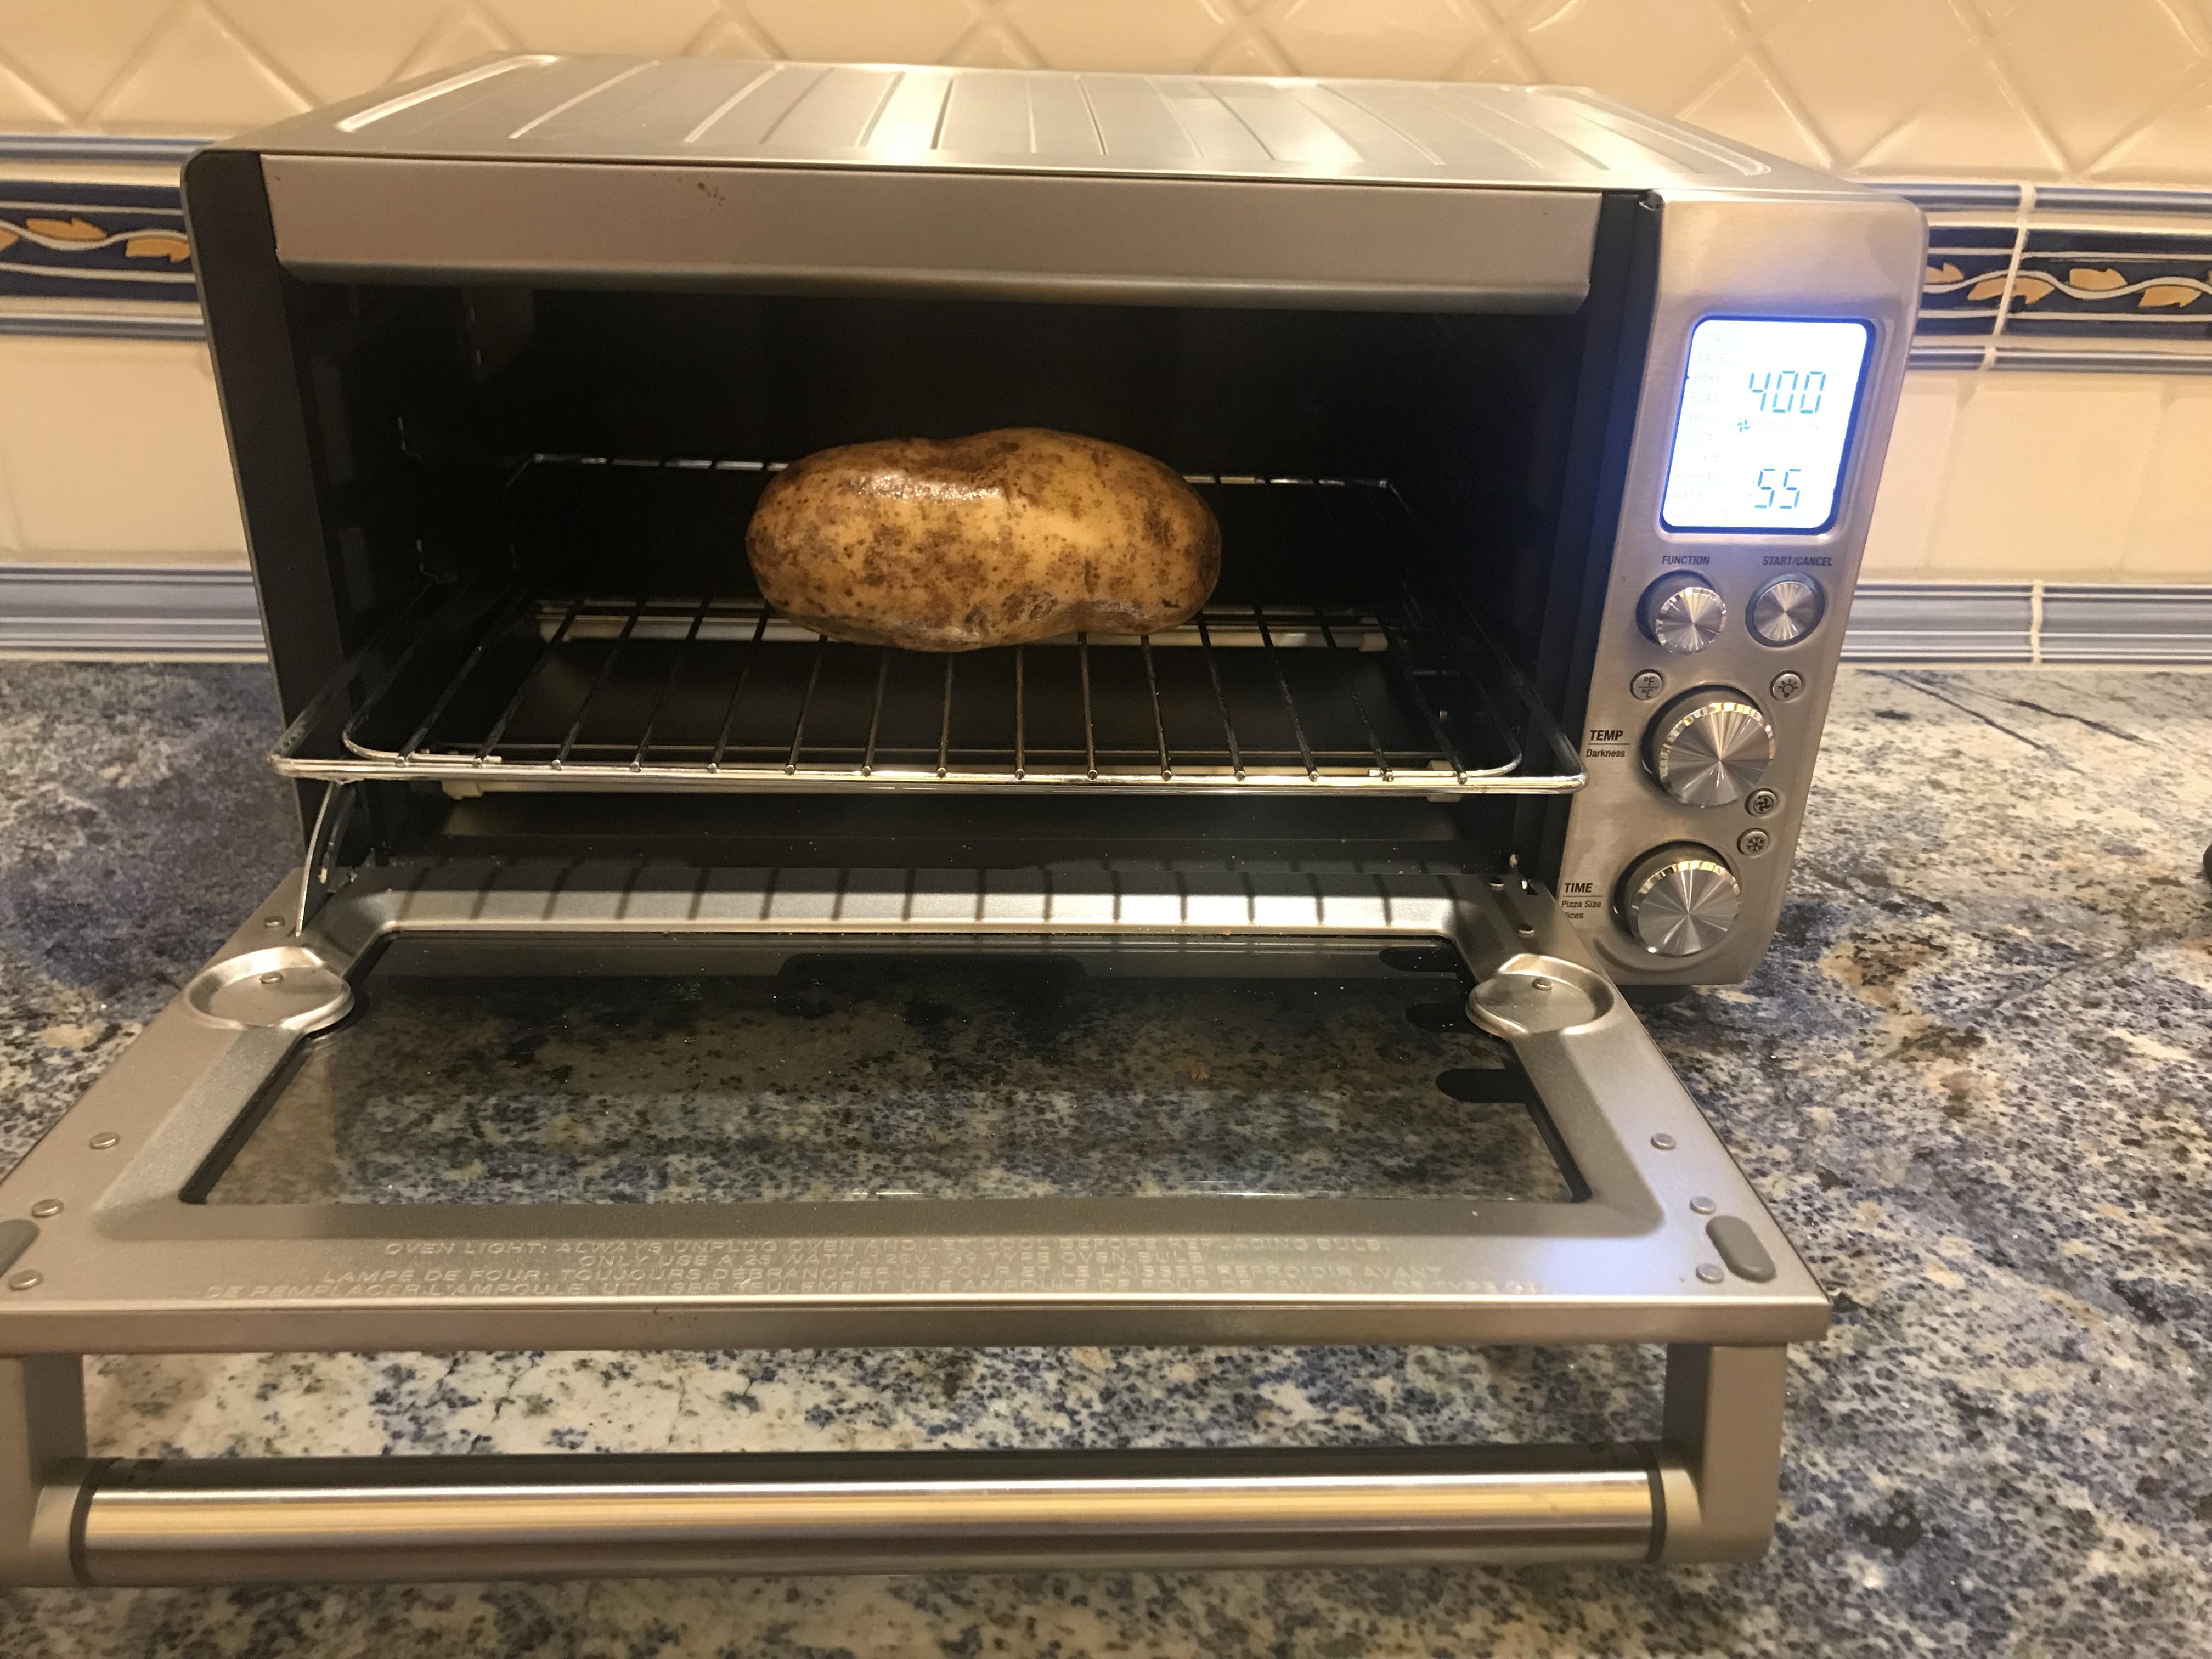 How To Make Baked Potatoes In Toaster Oven